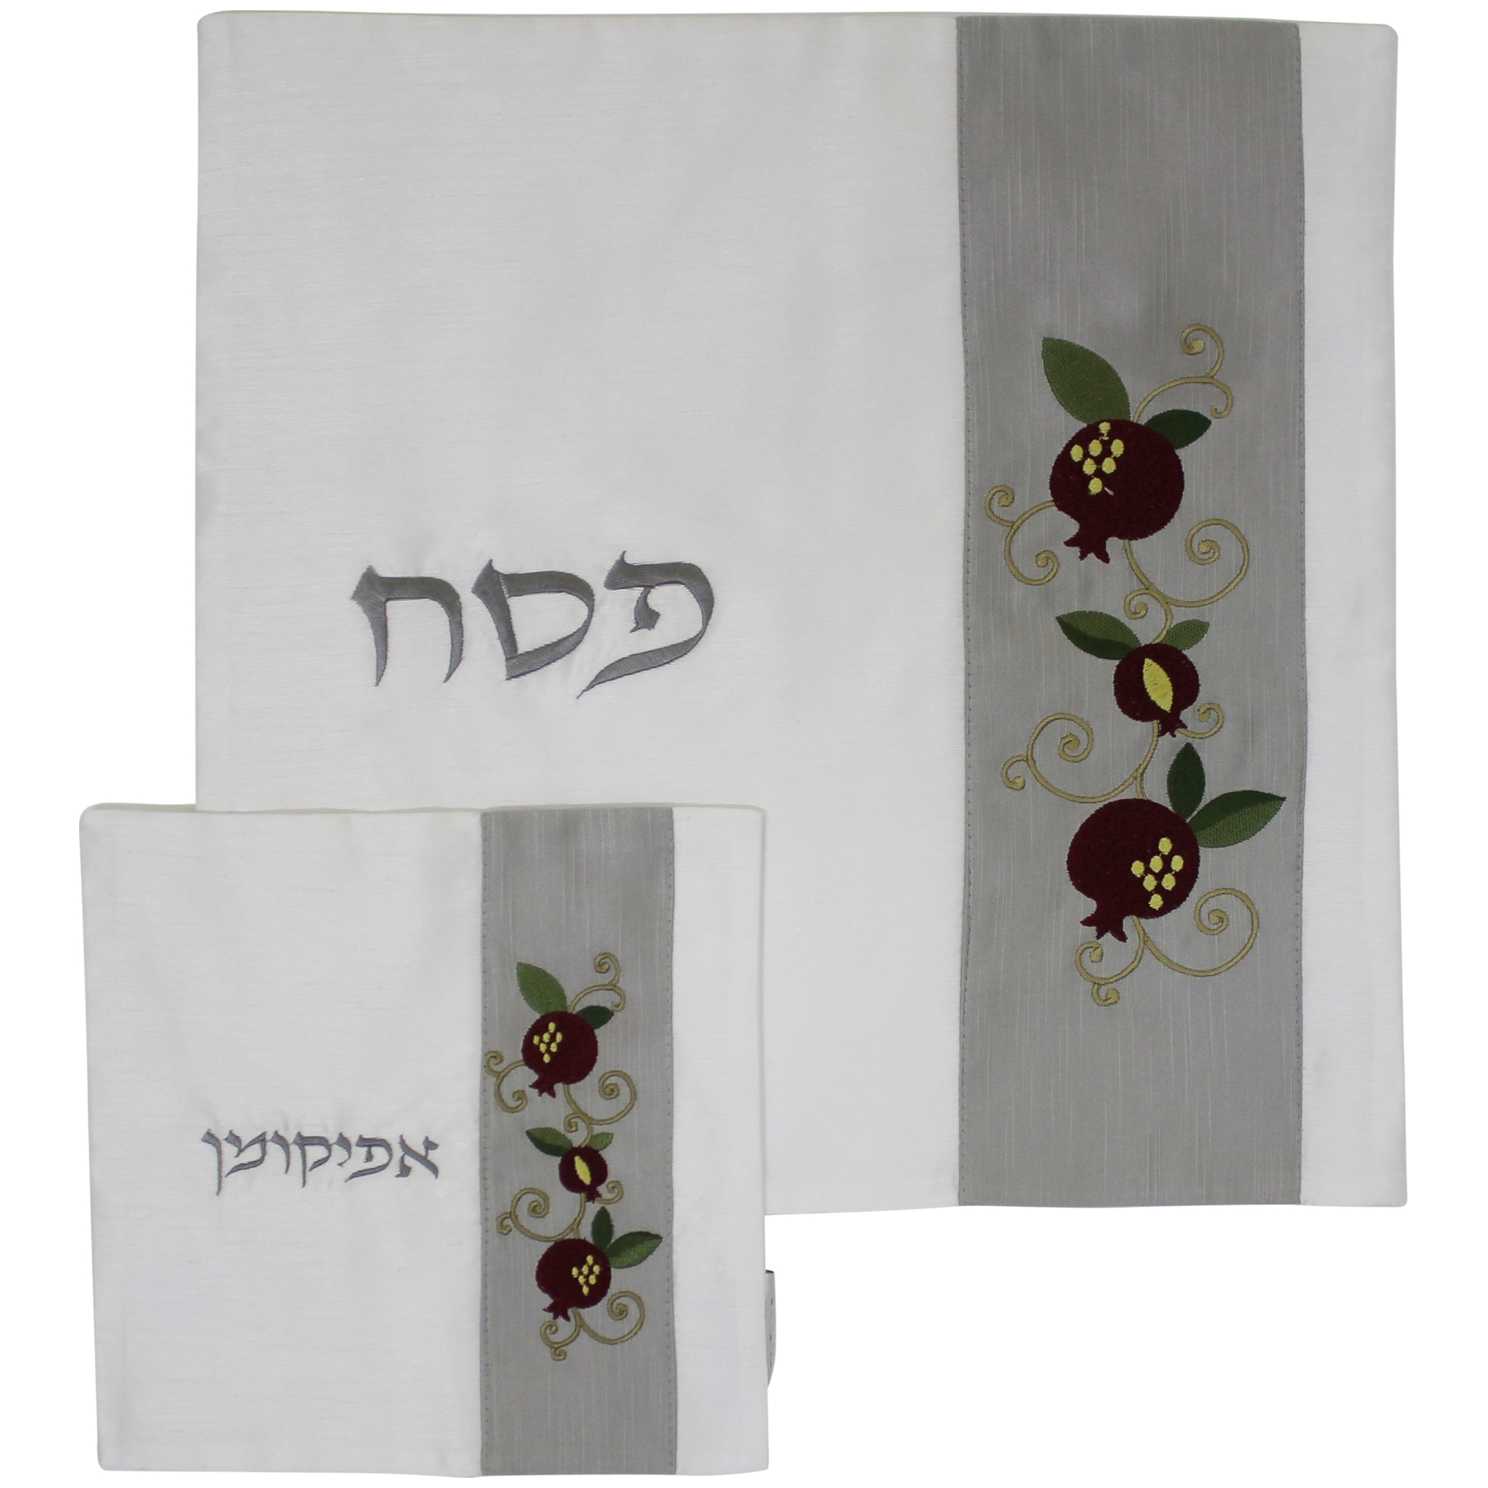 Matzah Cover Square or Round Zion Judaica Passover Seder TableTop Renaissance Collection Seder Plate Matzah Plate Matzah & Afikomen Bag Square Afikomen Bag Available Individually or Complete Set Zion Judaica Ltd MC-AB-SS01 